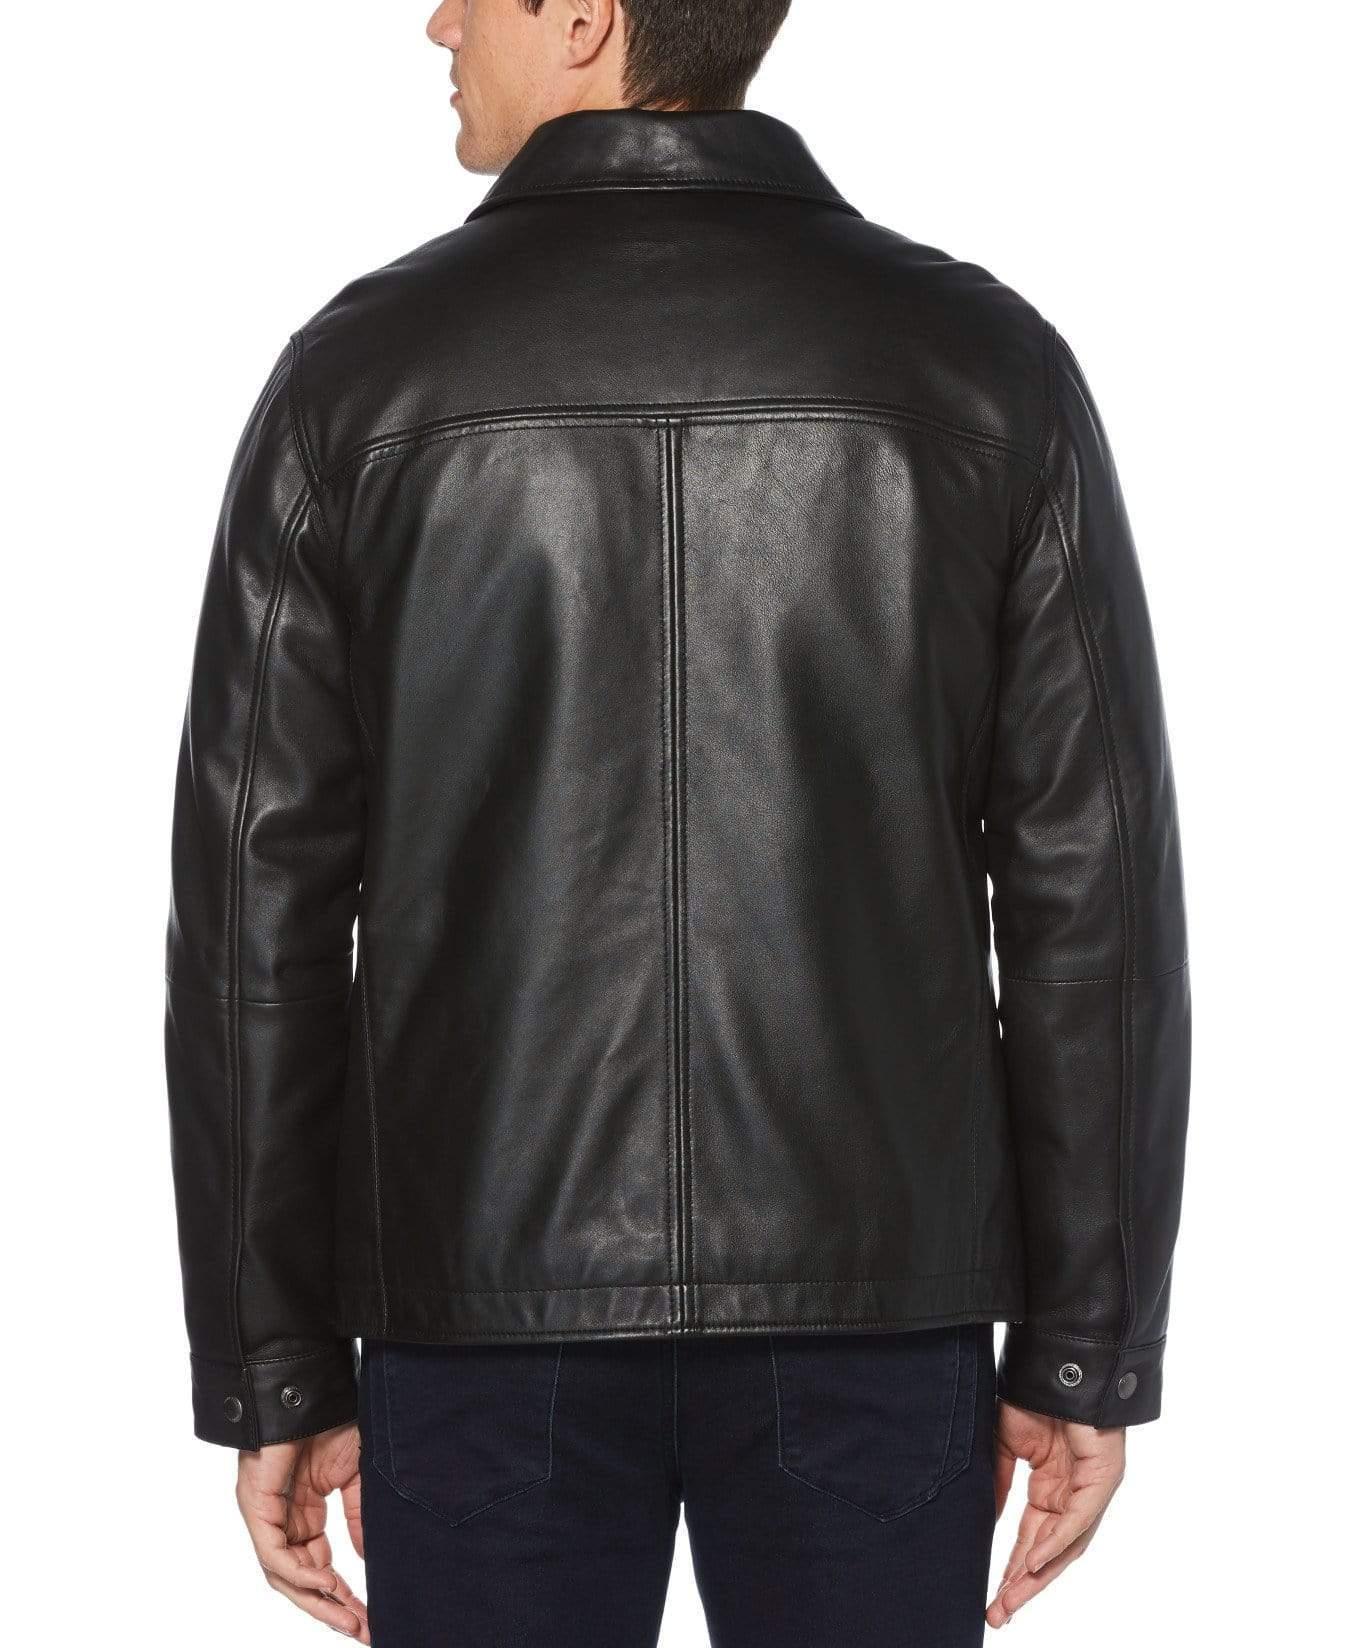 Perry Ellis Classic Leather Jacket in Black for Men - Lyst